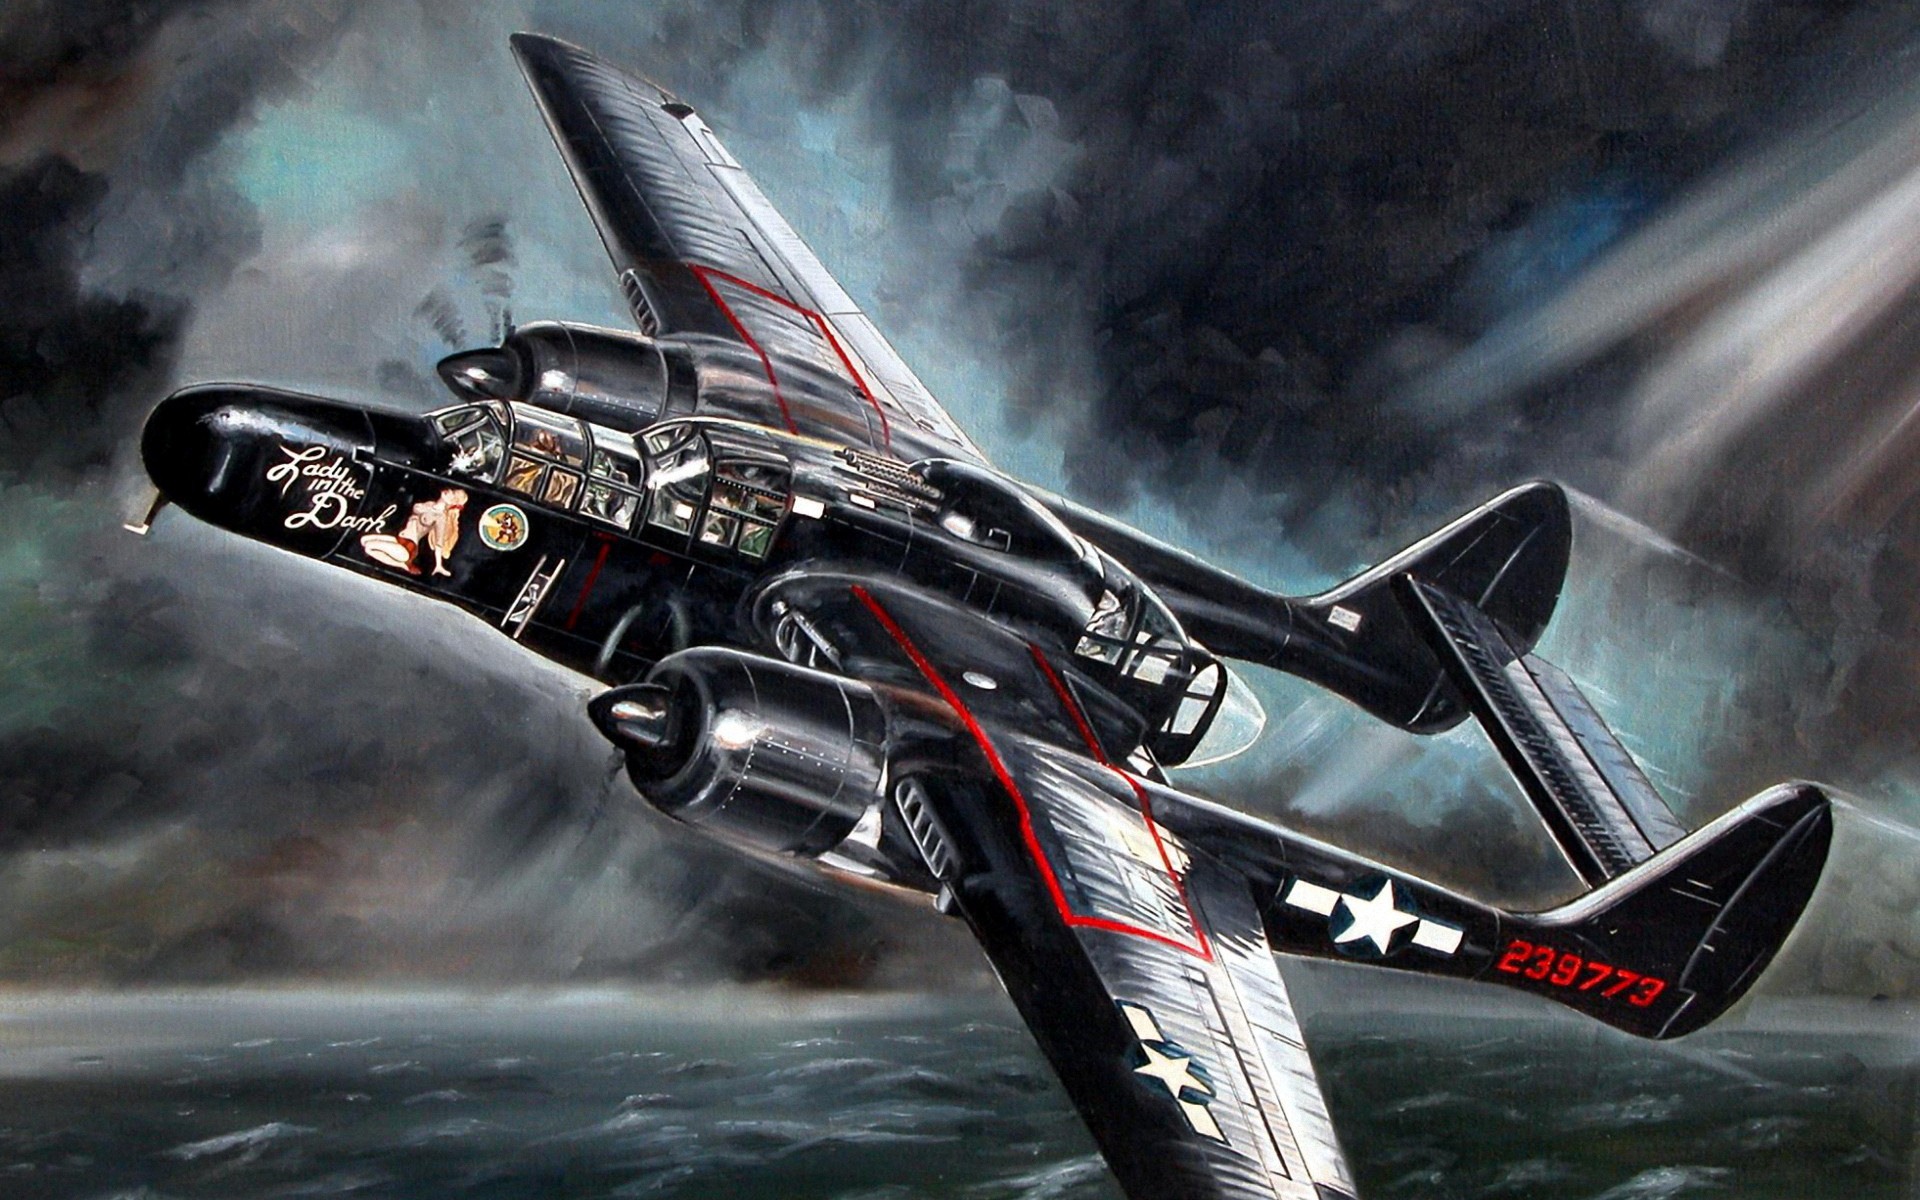 Military aircraft flight exquisite painting wallpapers #10 - 1920x1200